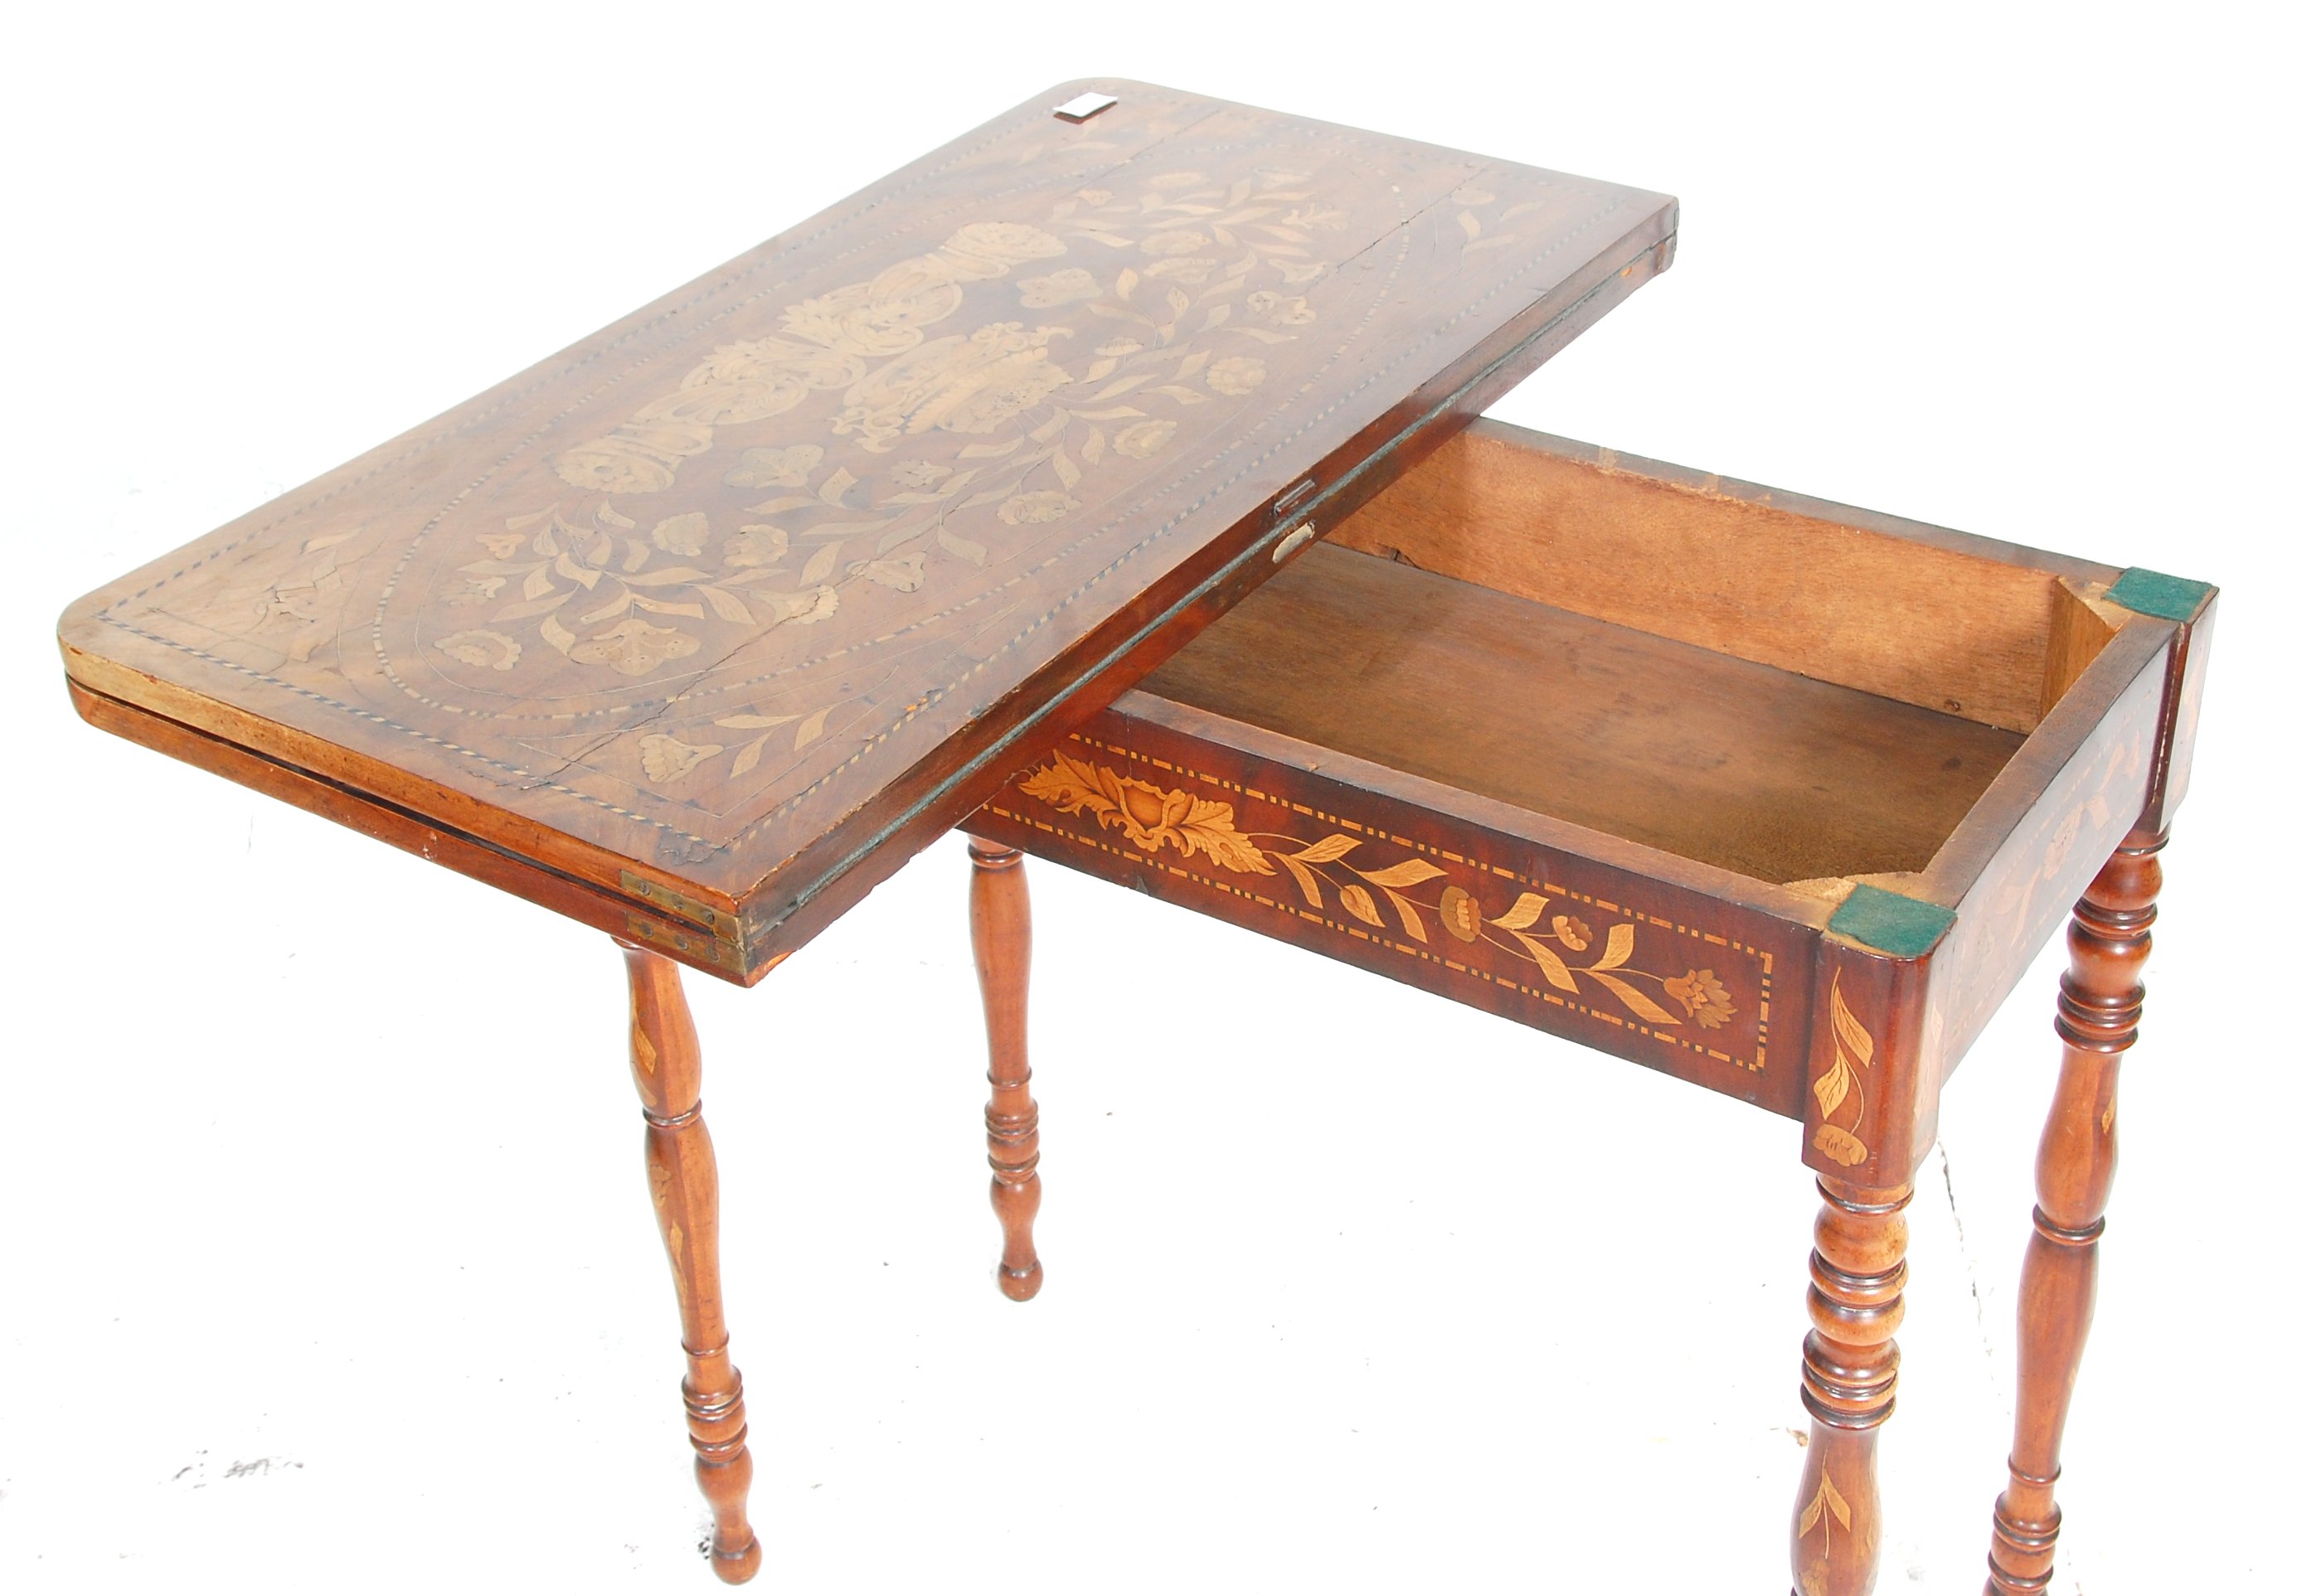 EARLY 19TH CENTURY ANTIQUE WALNUT CARD GAMES TABLE - Image 4 of 6